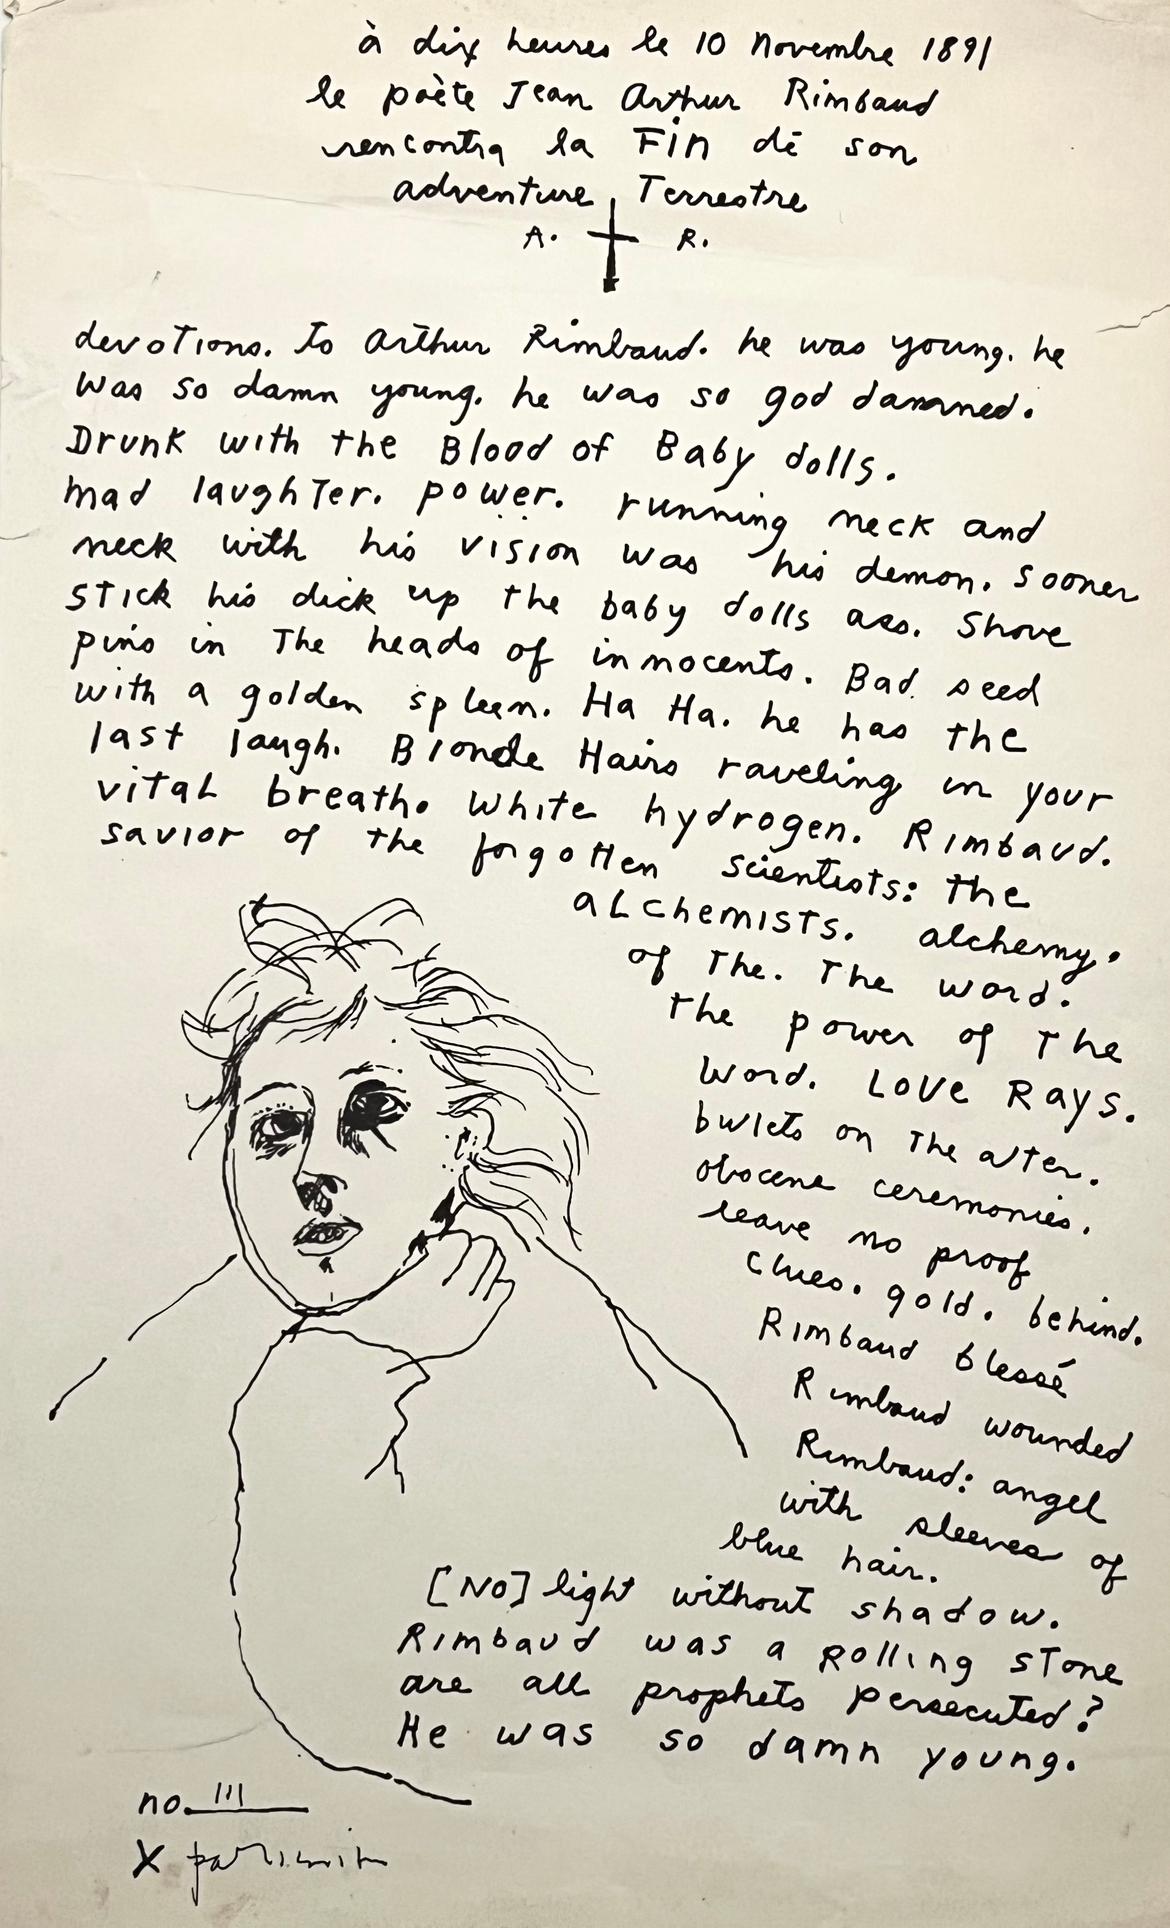 Patti Smith Devotions to Arthur Rimbaud 1973:
A rare early Patti Smith print featuring her poetry and artwork; constructed by Smith as a declaration of her admiration & love for Arthur Rimbaud - the famous French symbolist poet who played a pivotal